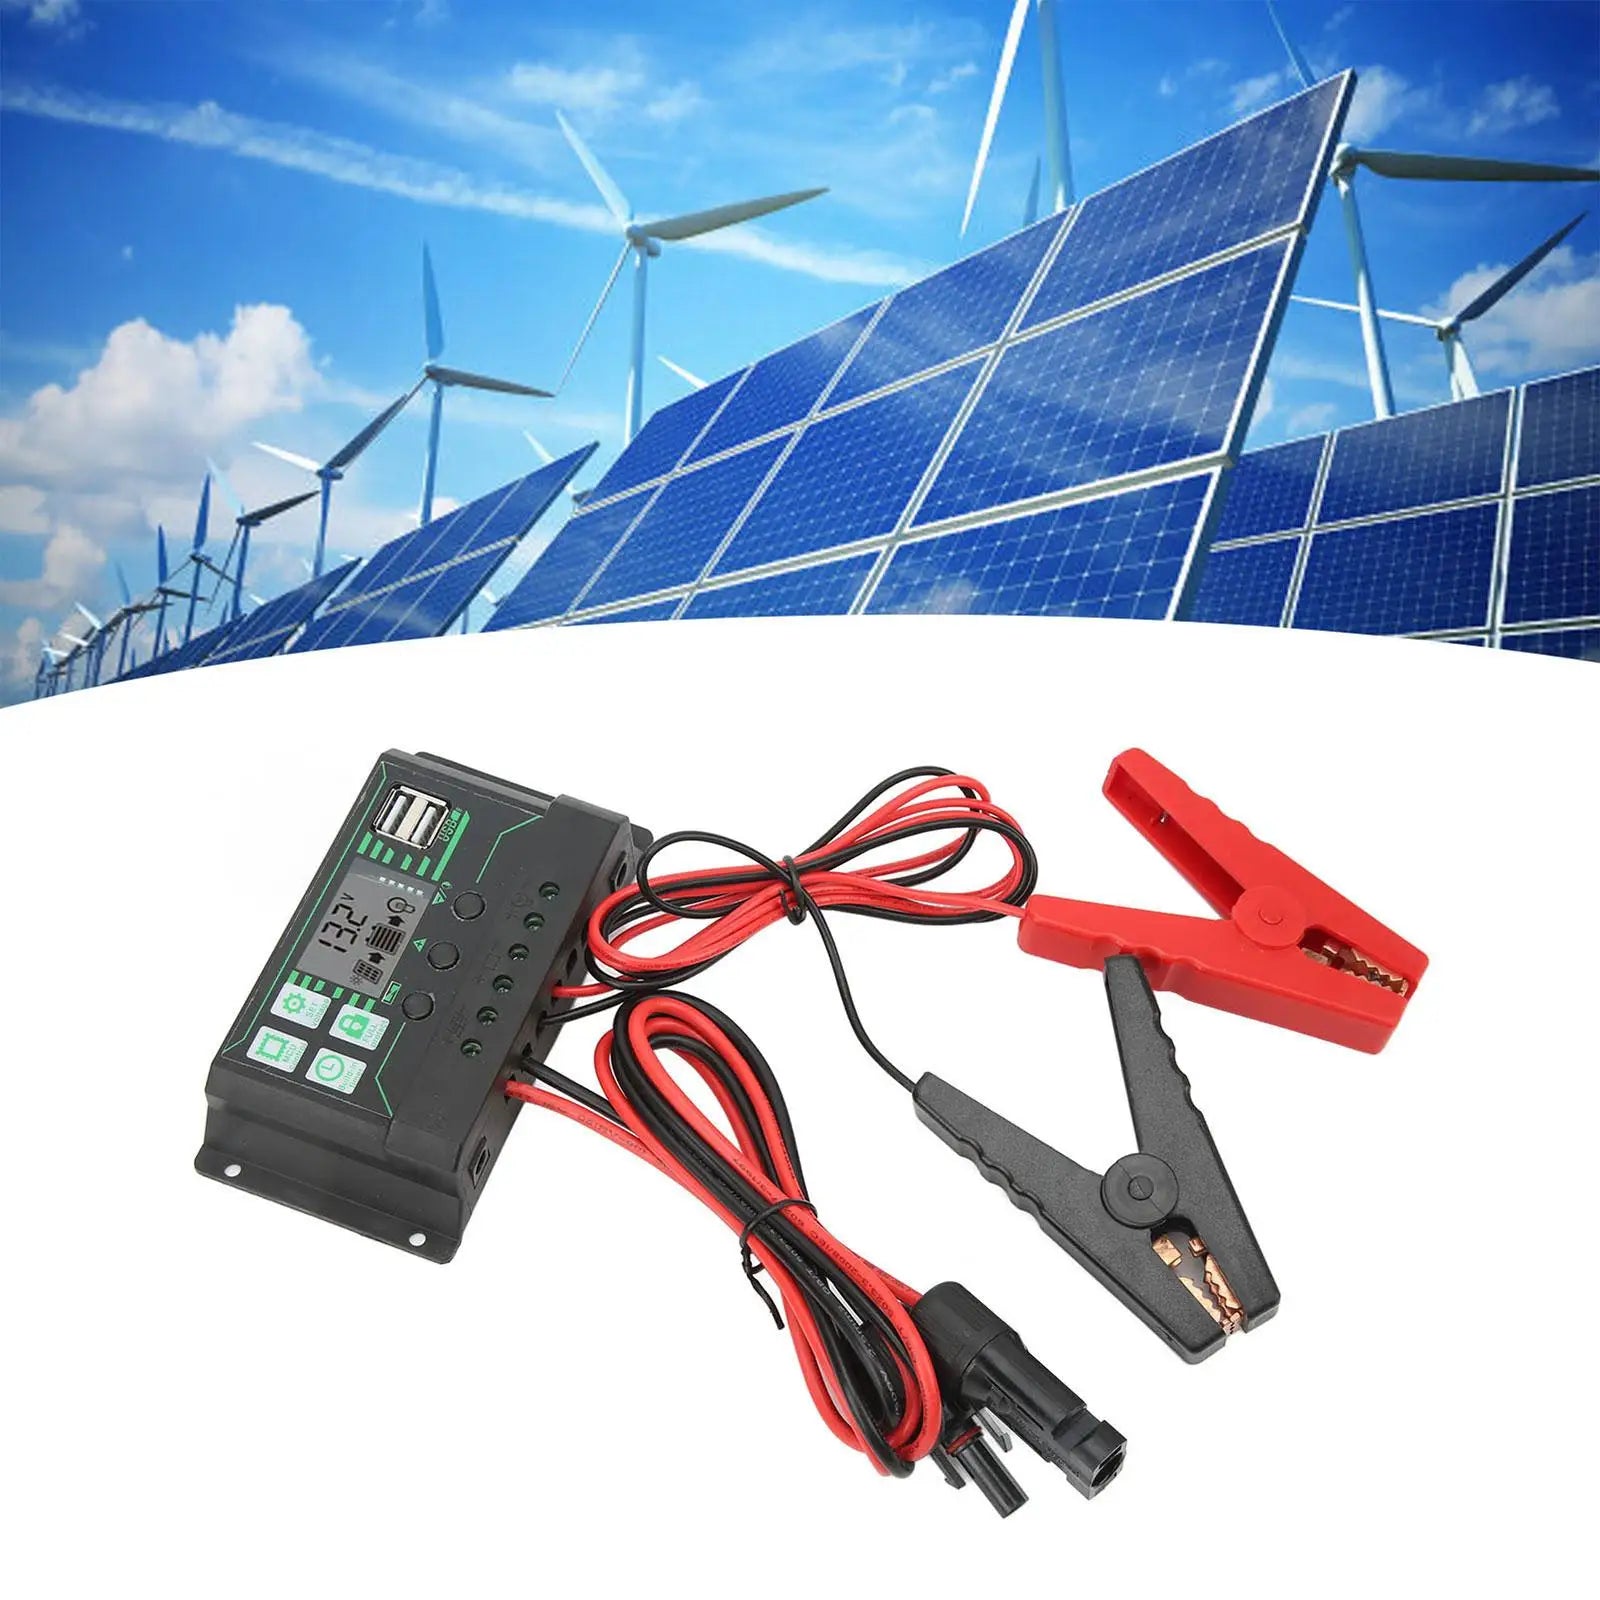 MPPT 10/20/30/60/100A Solar Charge Controller, Effective protection of batteries through complete three-phase charging management, enhancing durability.